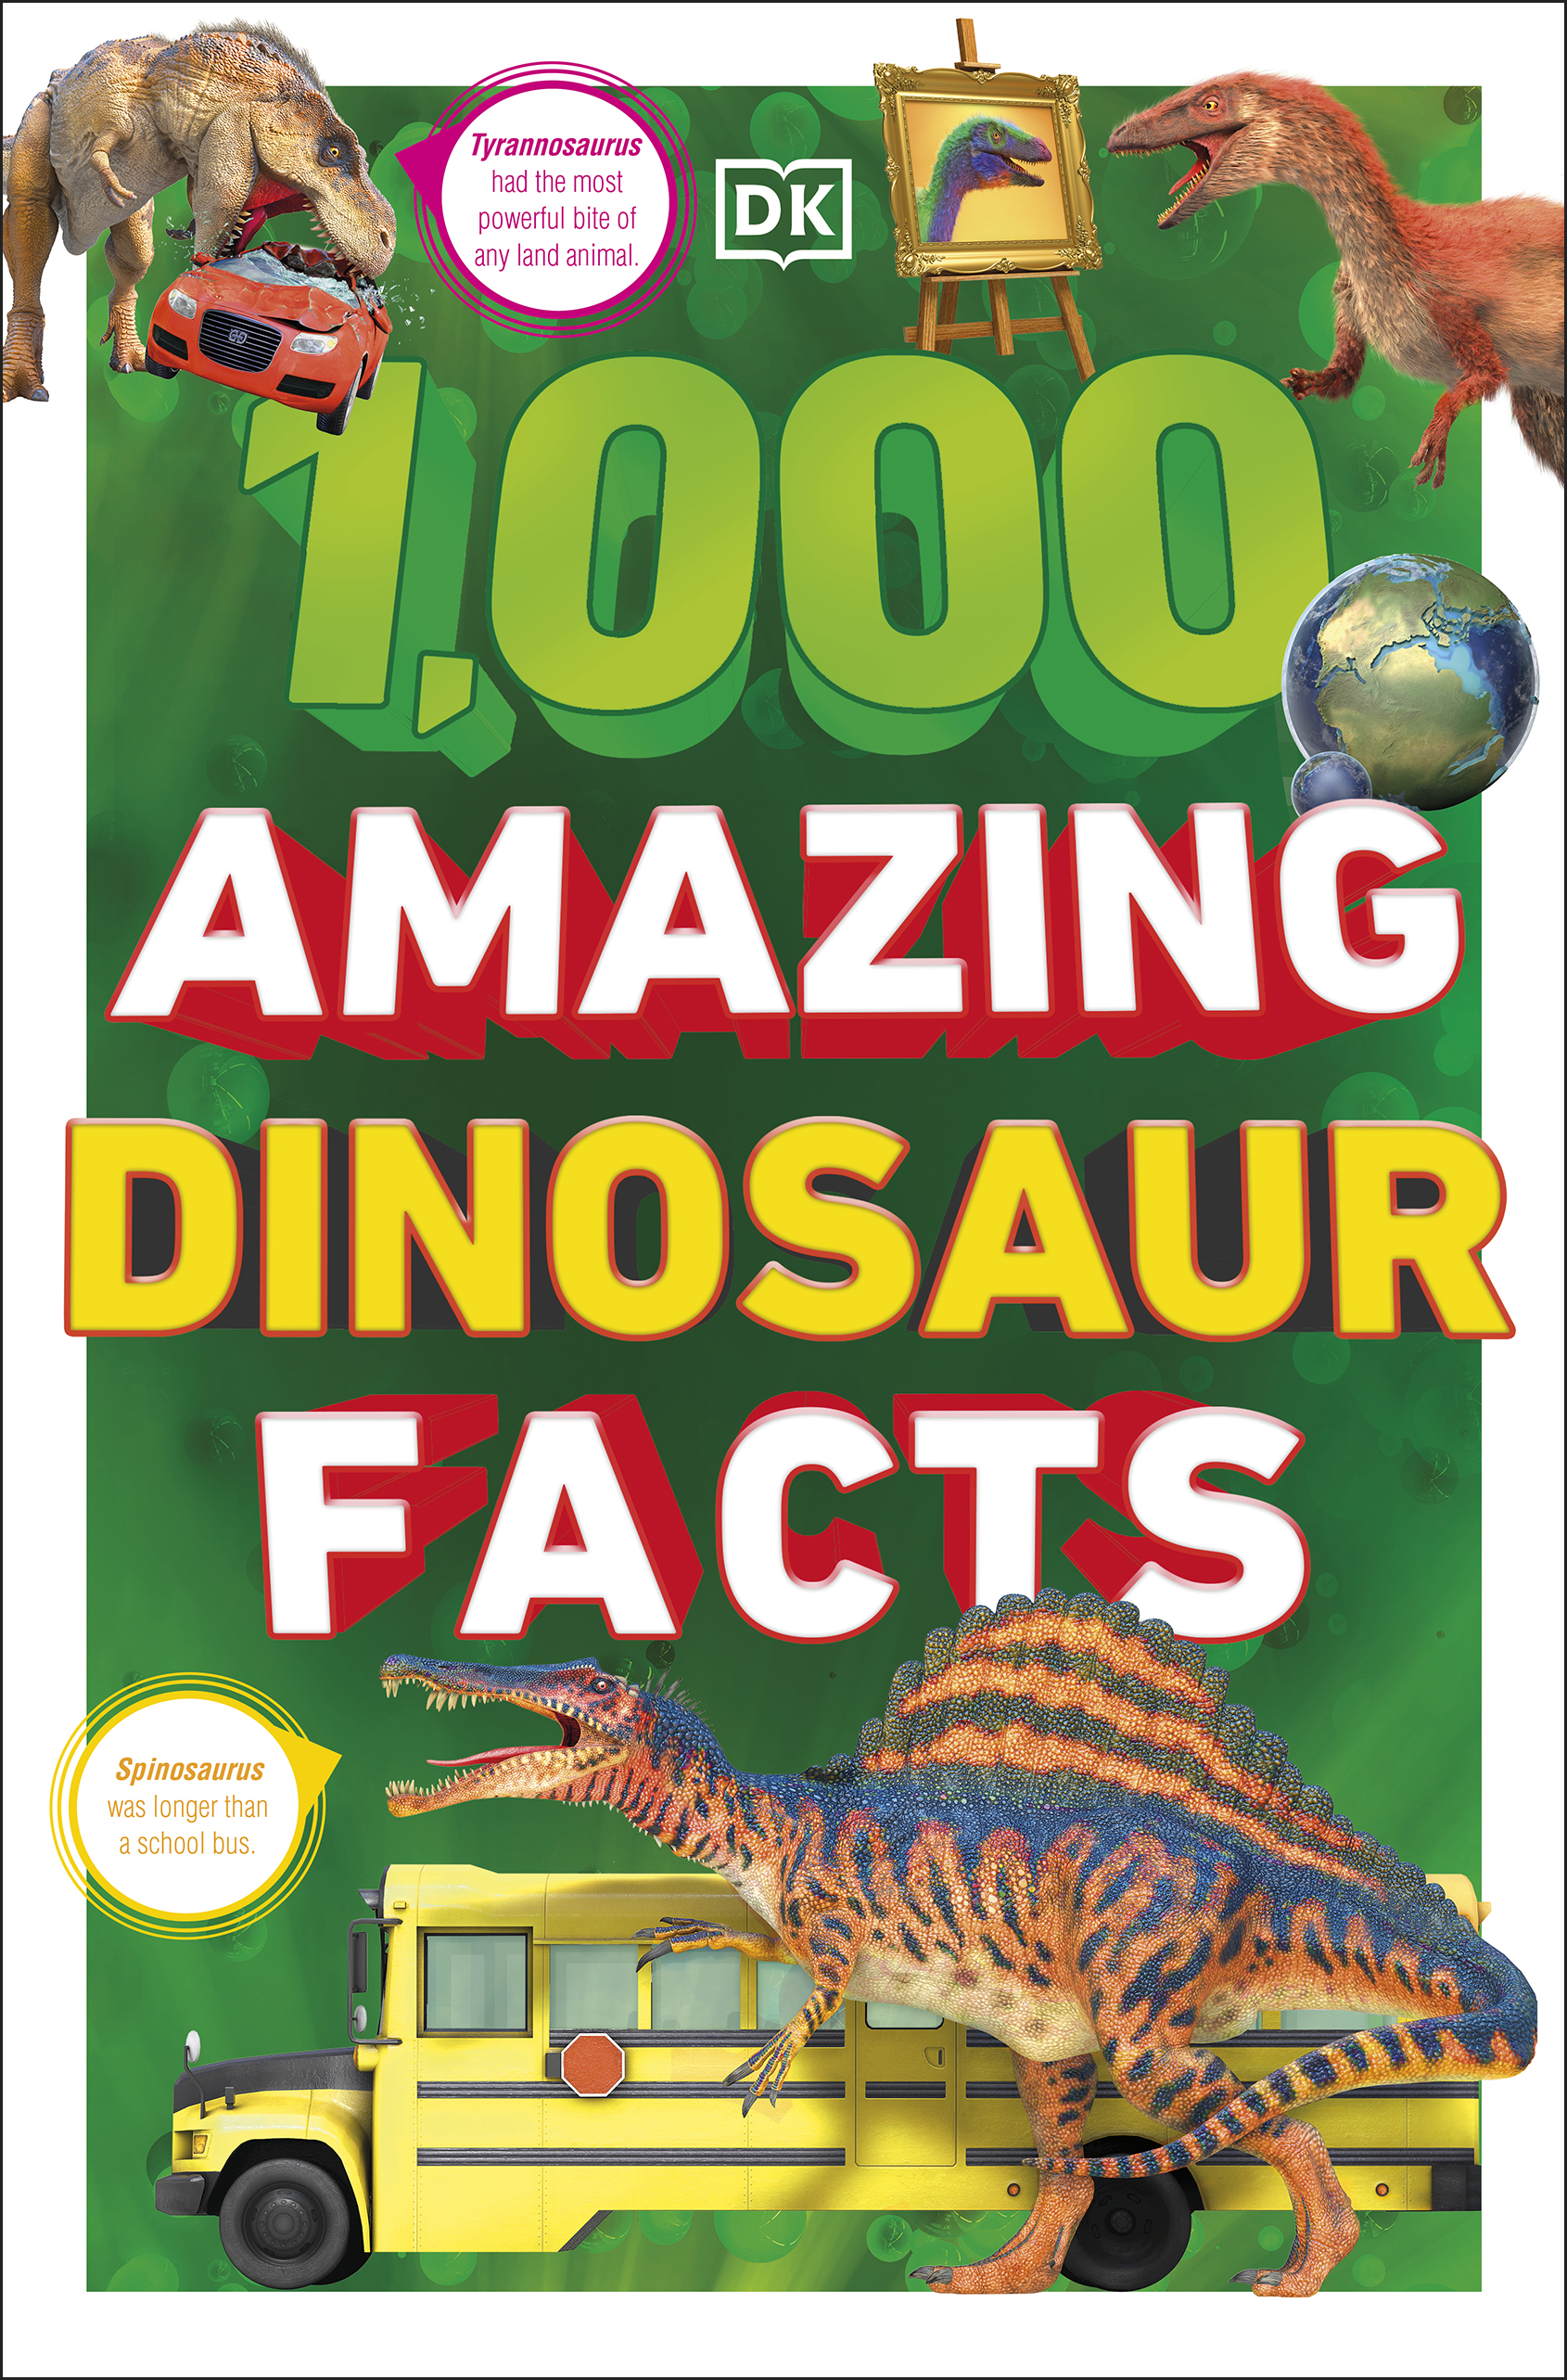 1,000 Amazing Dinosaurs Facts Unbelievable Facts About Dinosaurs cover image